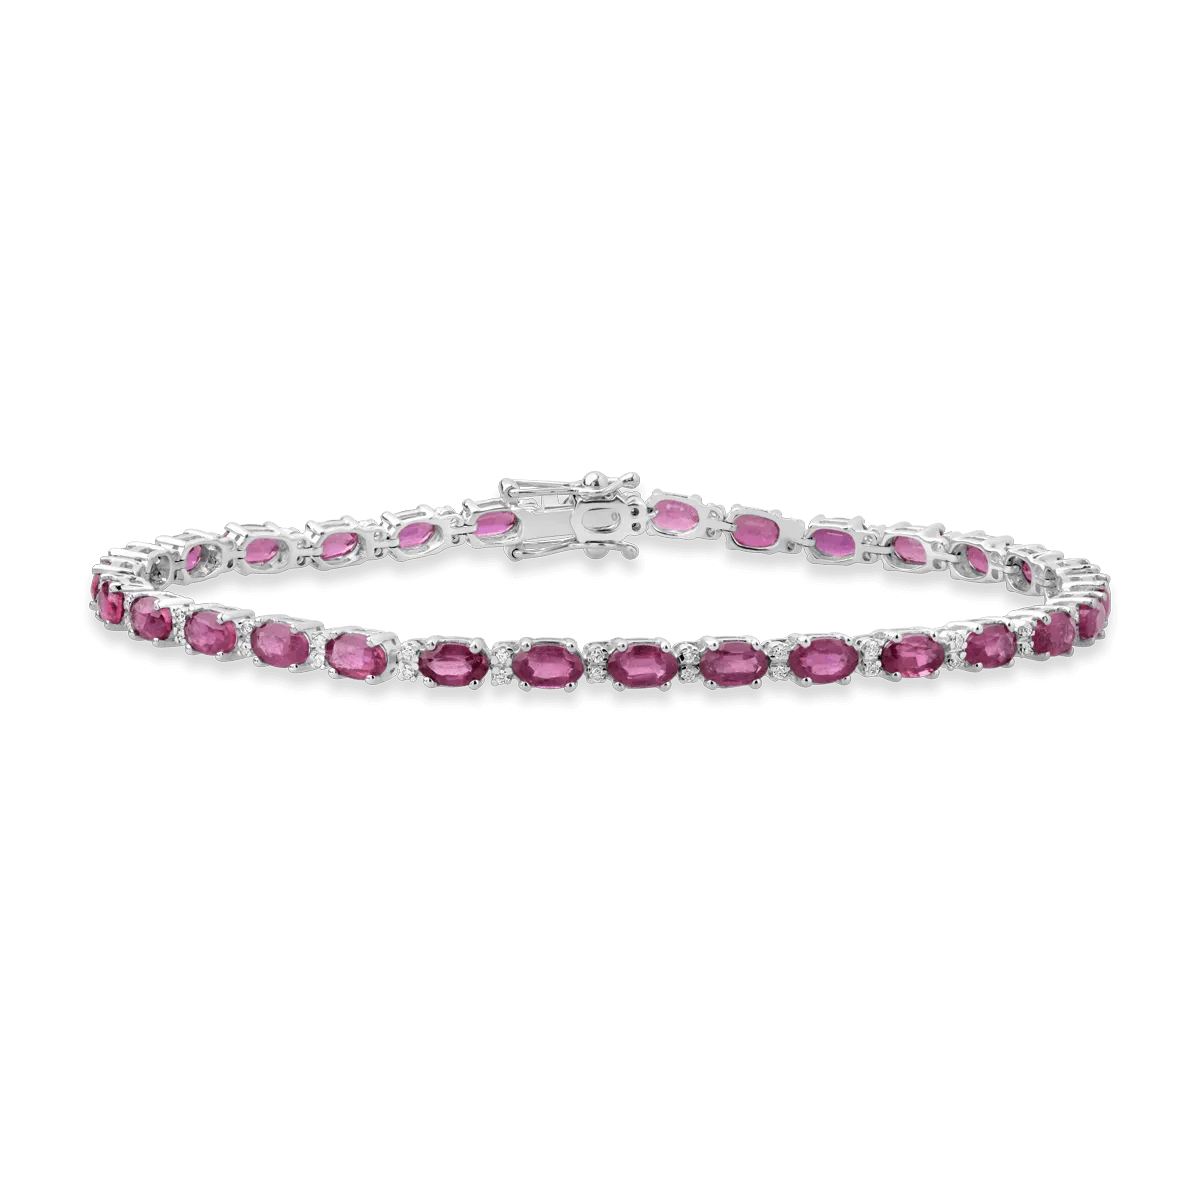 18K white gold tennis bracelet with 8.89ct treated rubies and 0.27ct diamonds